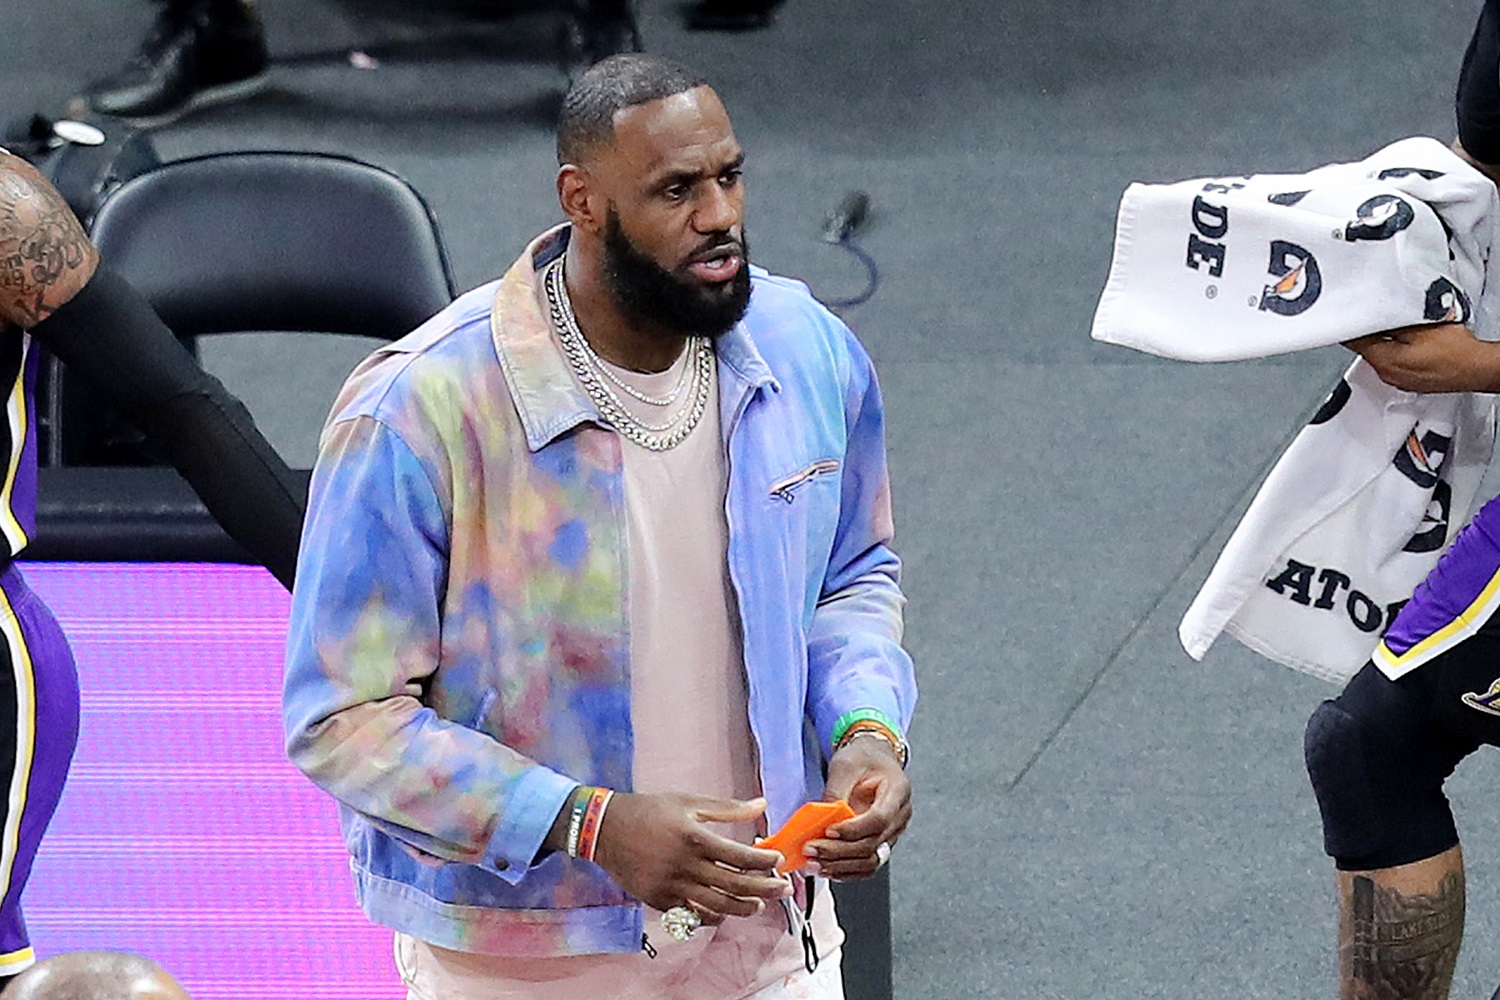 Los Angeles Lakers star LeBron James looks on during a game against the Orlando Magic at Amway Center on April 26, 2021 in Orlando, Florida.